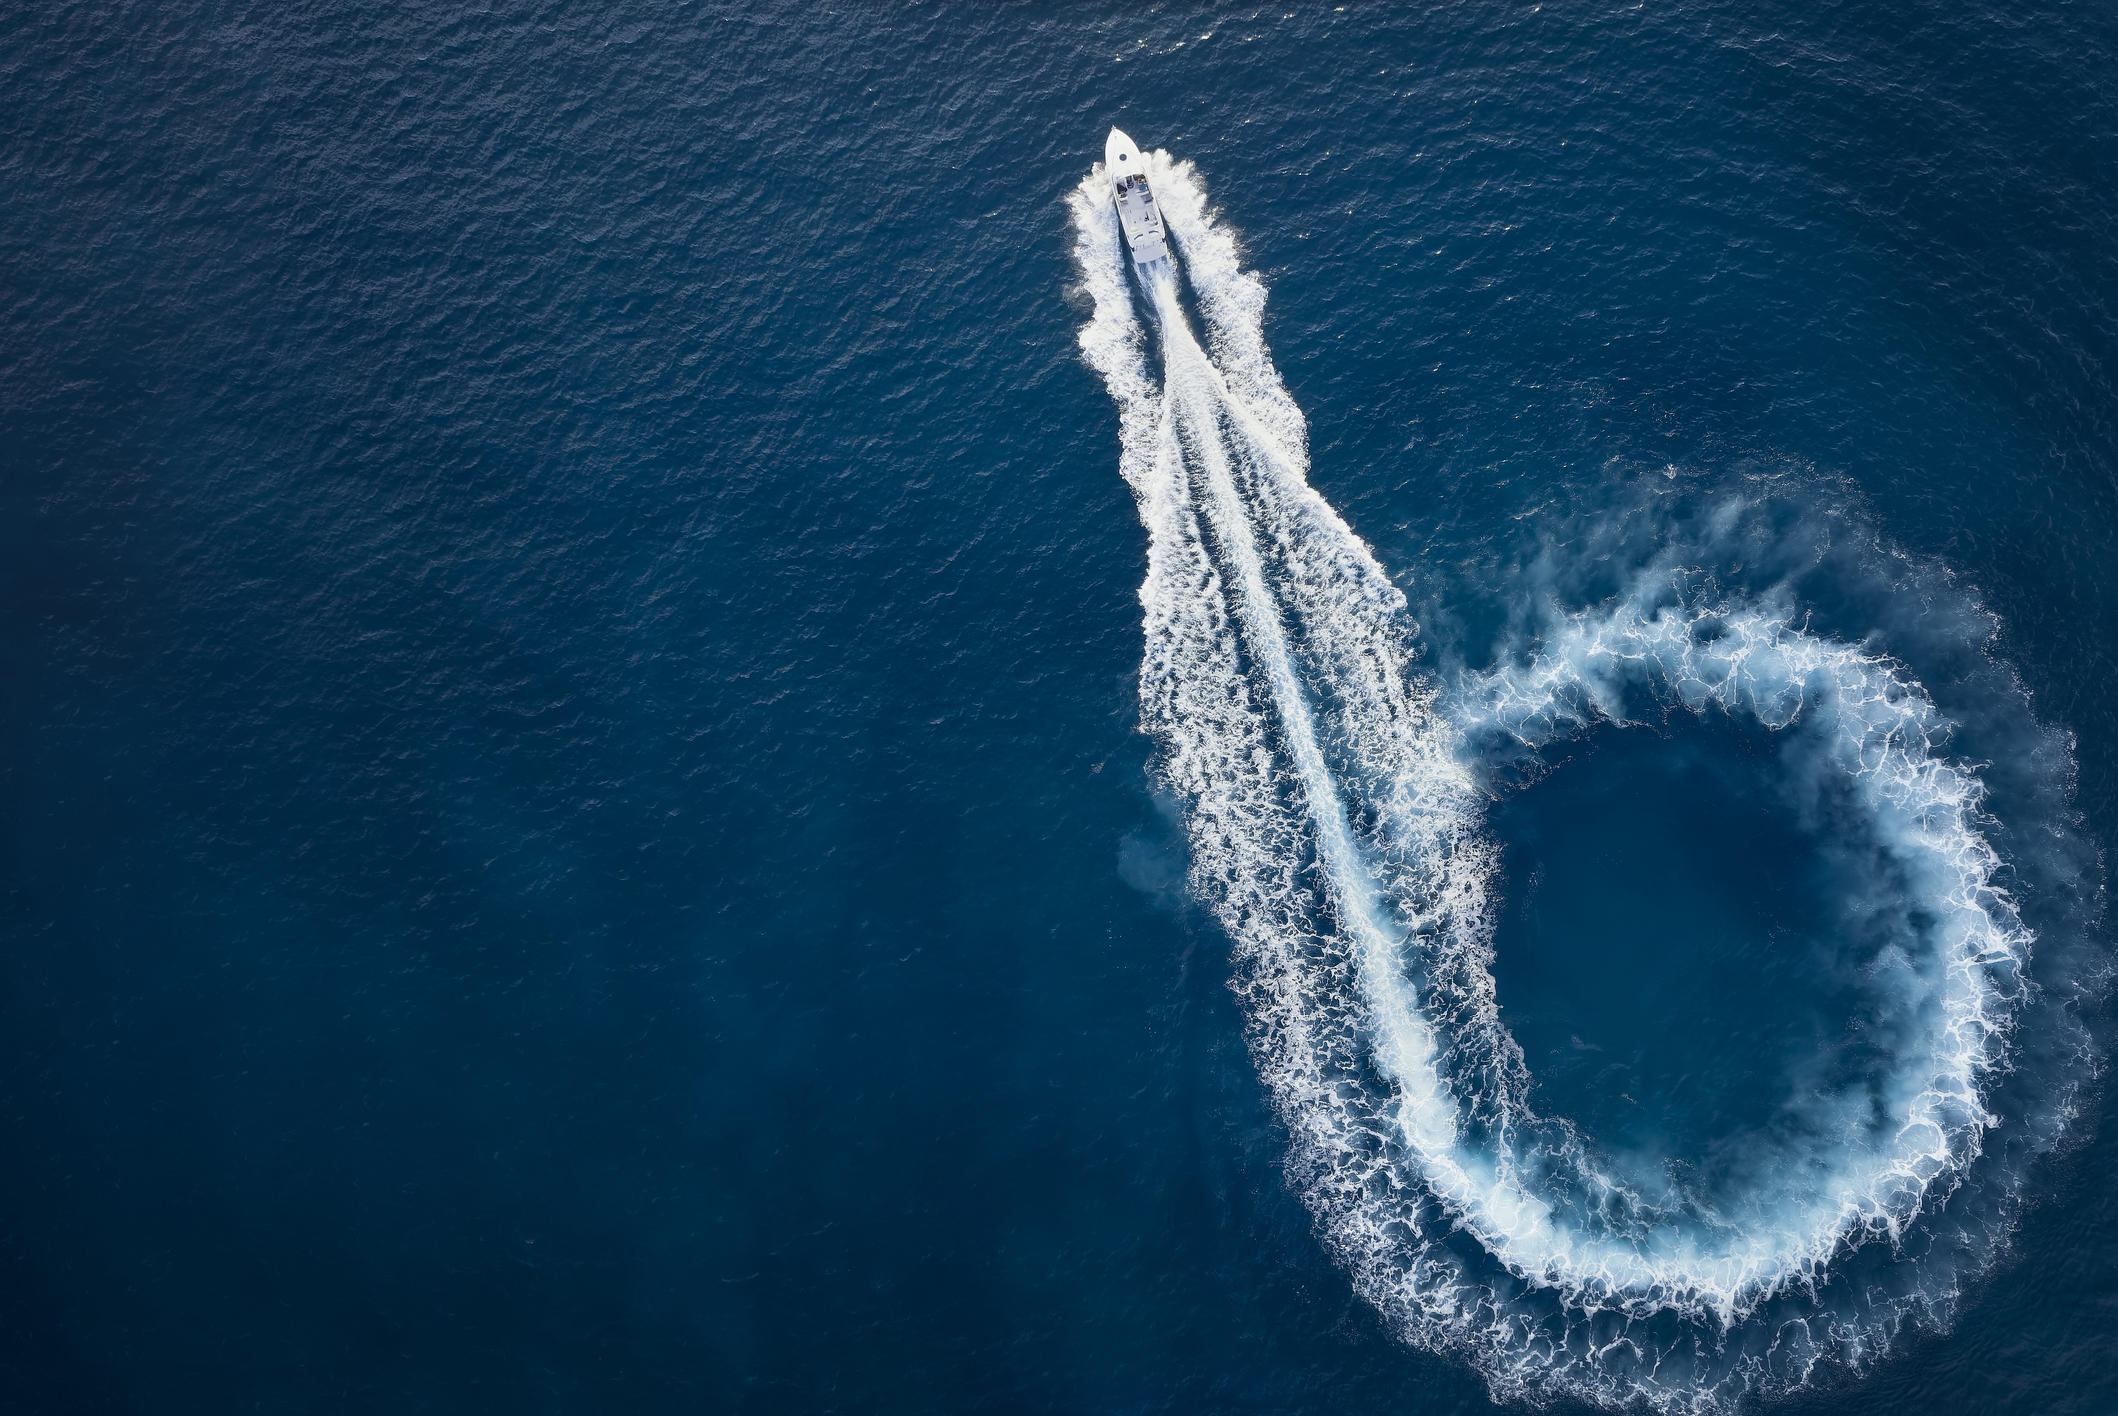 Aerial Top View Of A Motor Powerboat Forming A Circle Of Waves